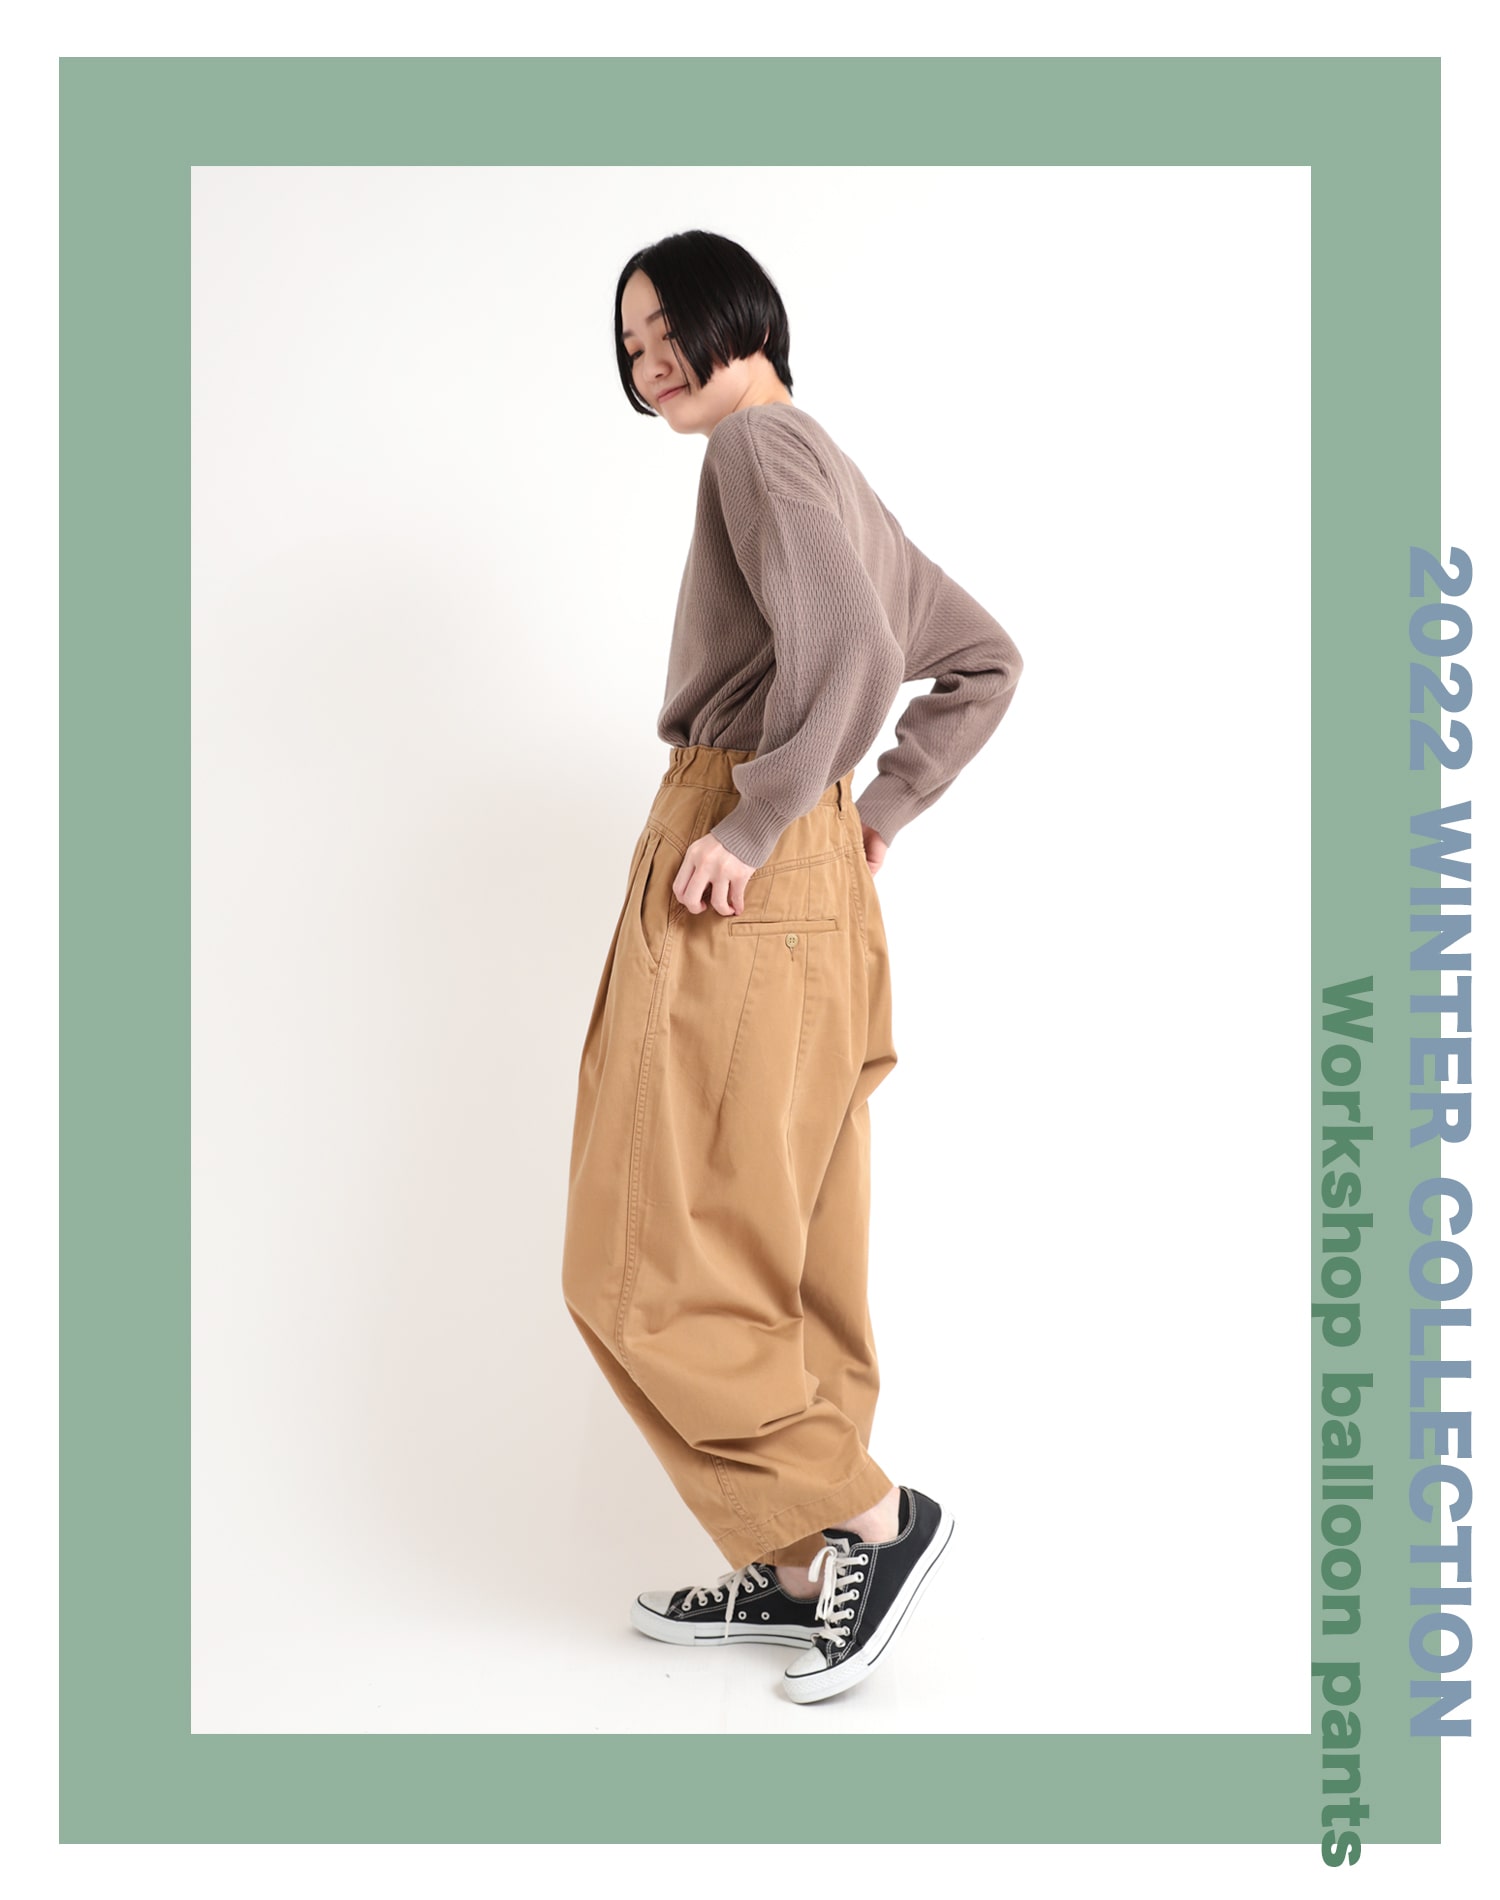 URCH5 pants style - RNA ONLINE STORE | アールエヌエー公式通販